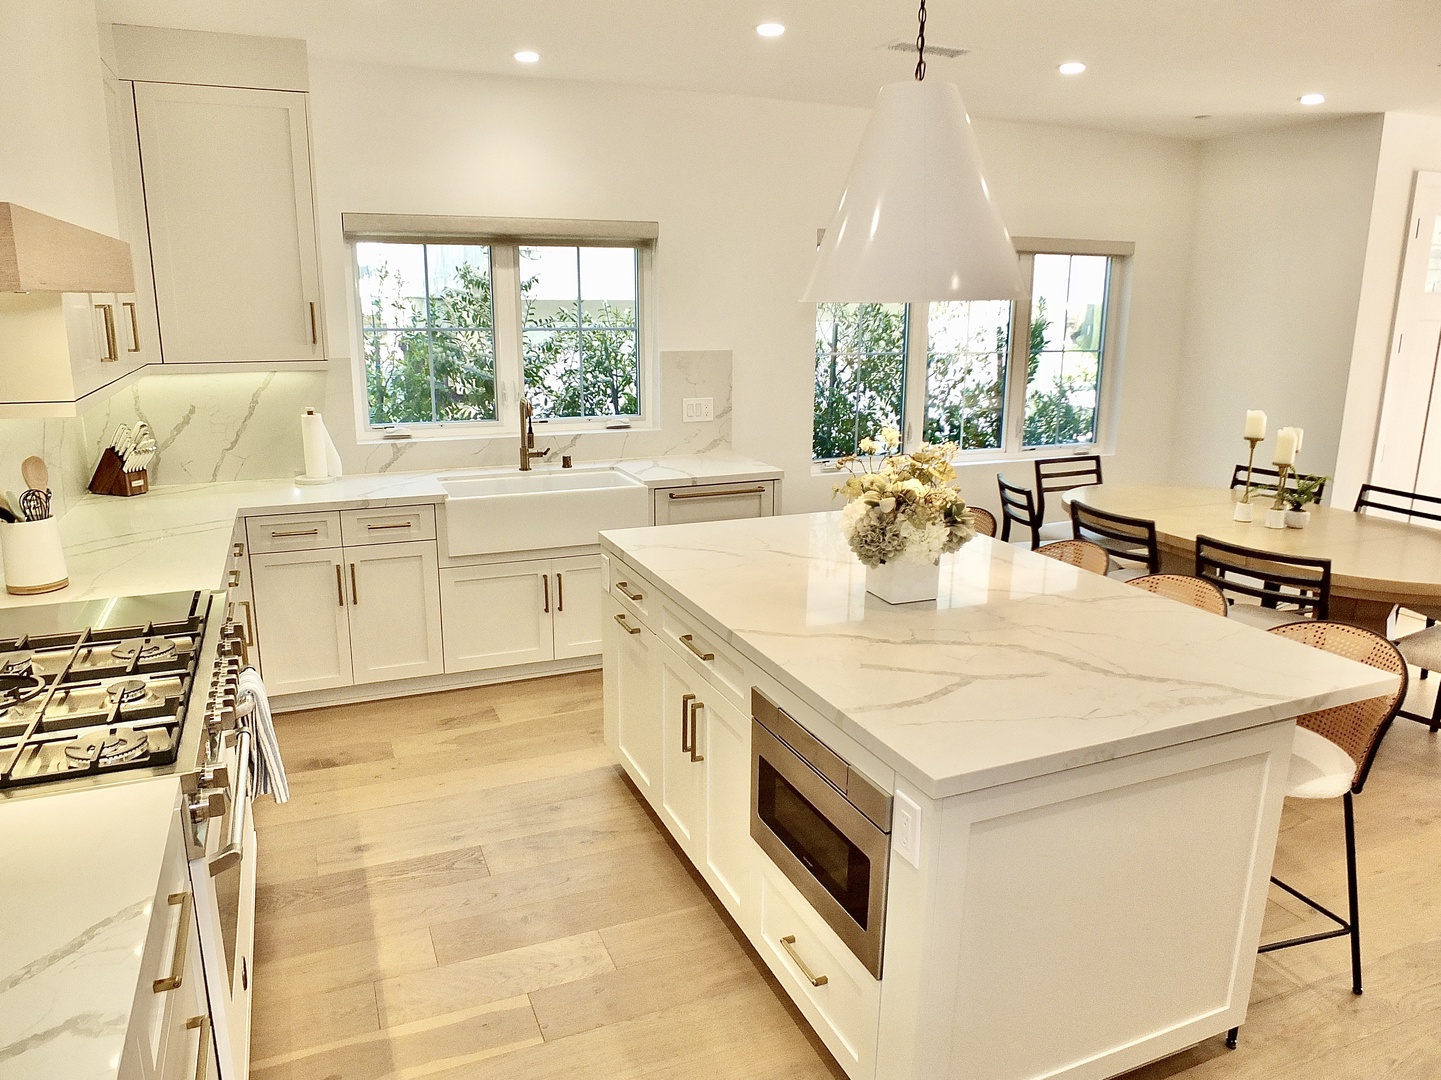 The elegant kitchen is a chef’s dream & offers every home comfort